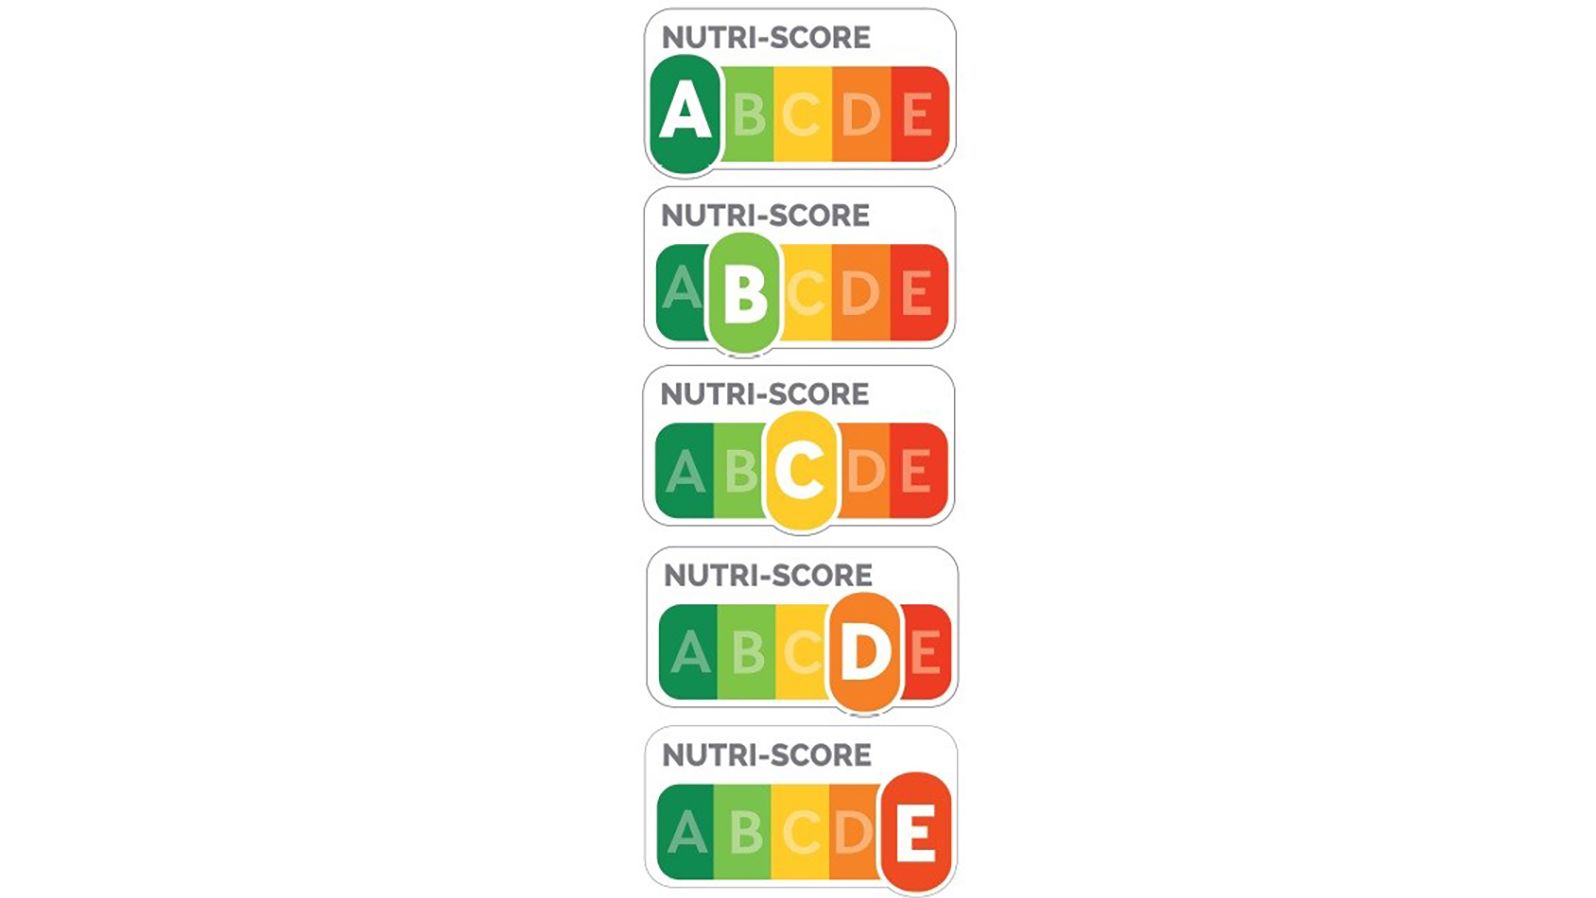 The Nutri-Score logo uses both colors and grades to help consumers "read" the nutritional quality of labeled food in a glance.